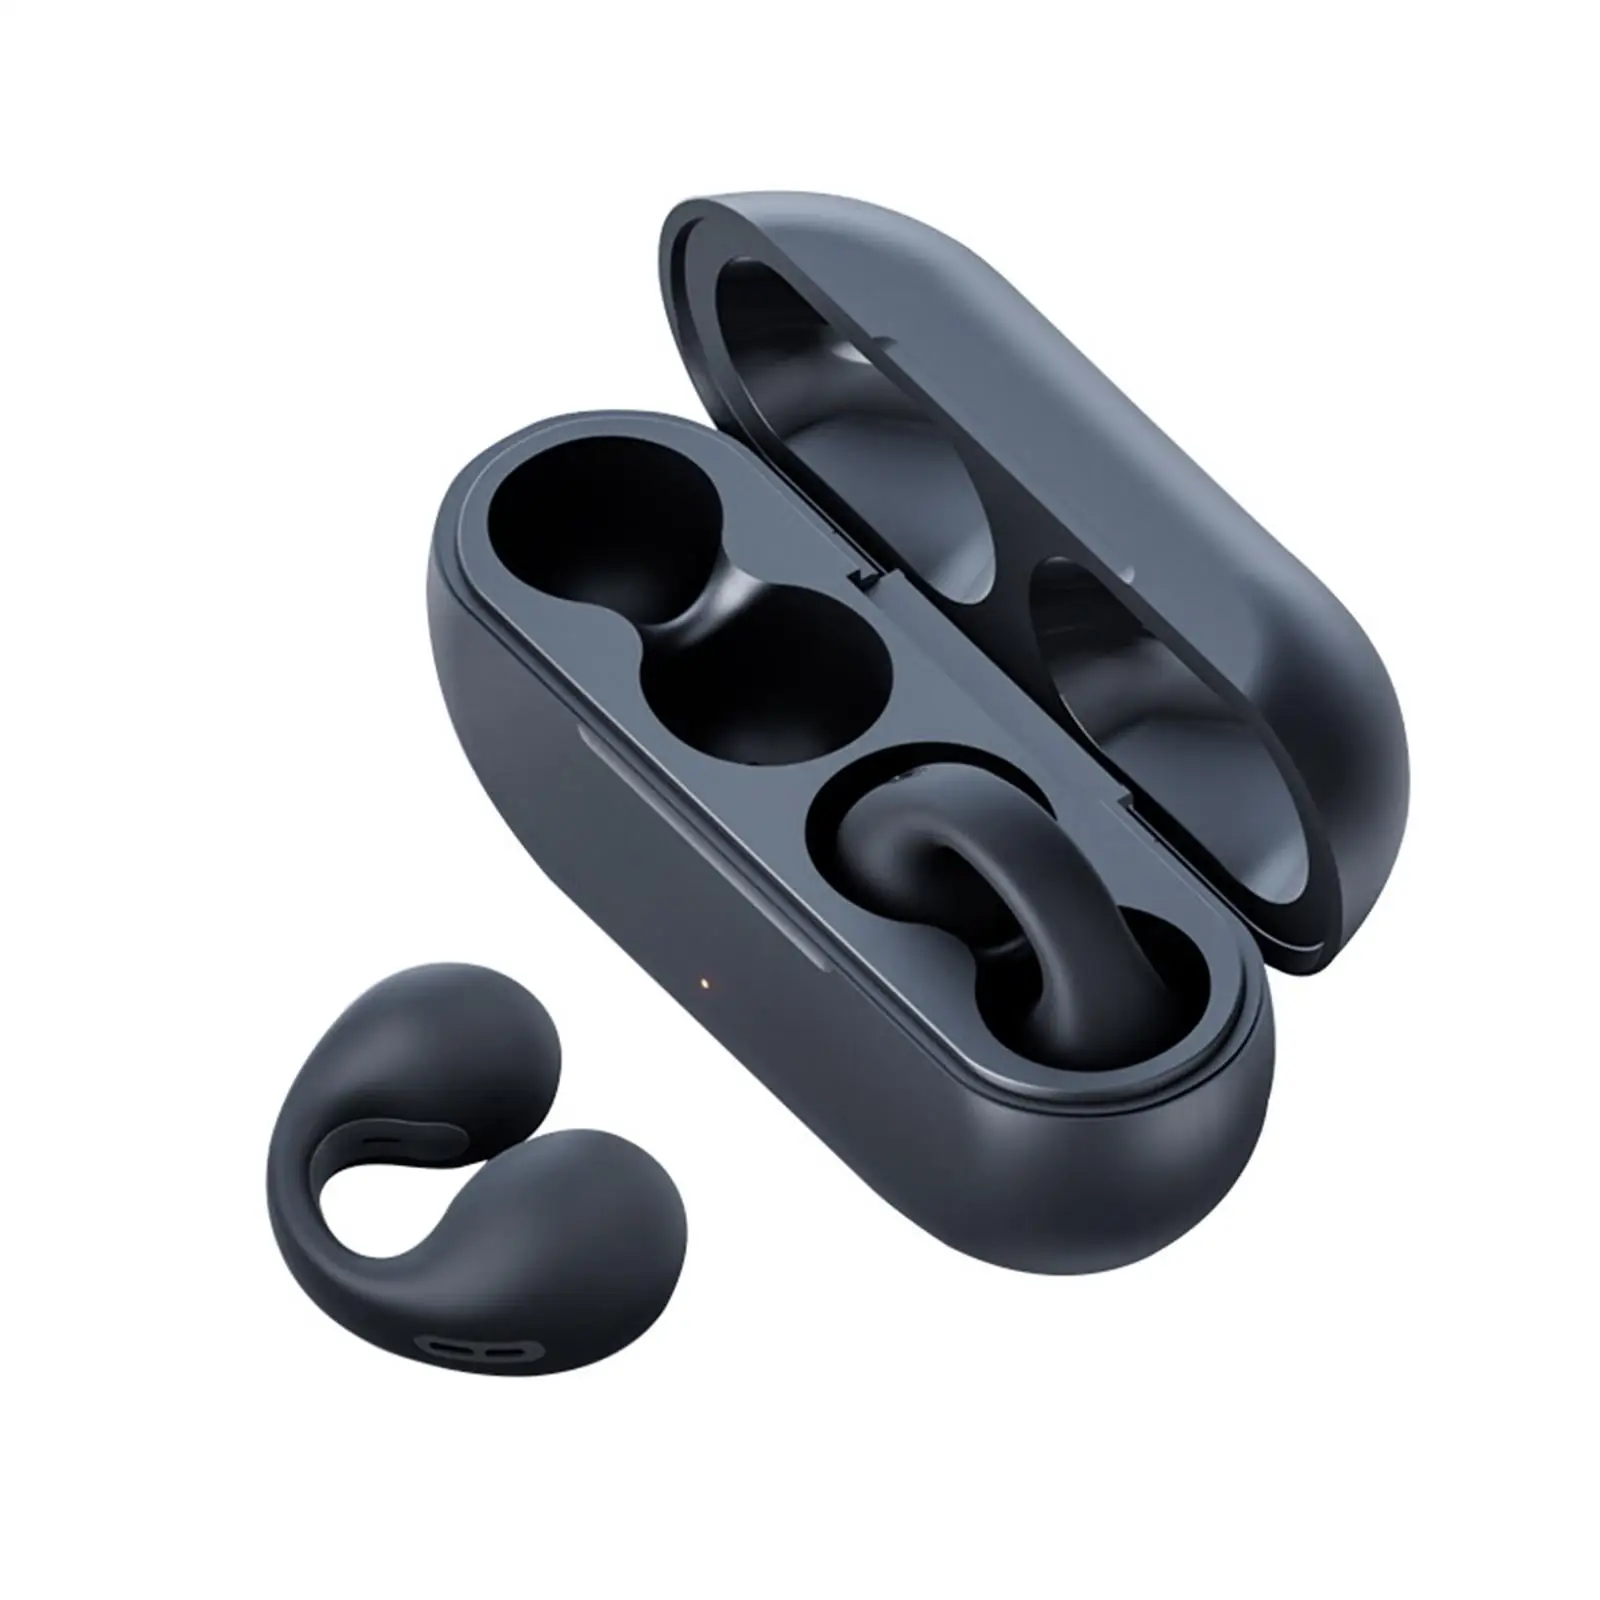 Clip On Wireless Earphones Calling Low Latency Comfortable to Wear Hands Free Sport Earbuds Headset for Workout Driving Business